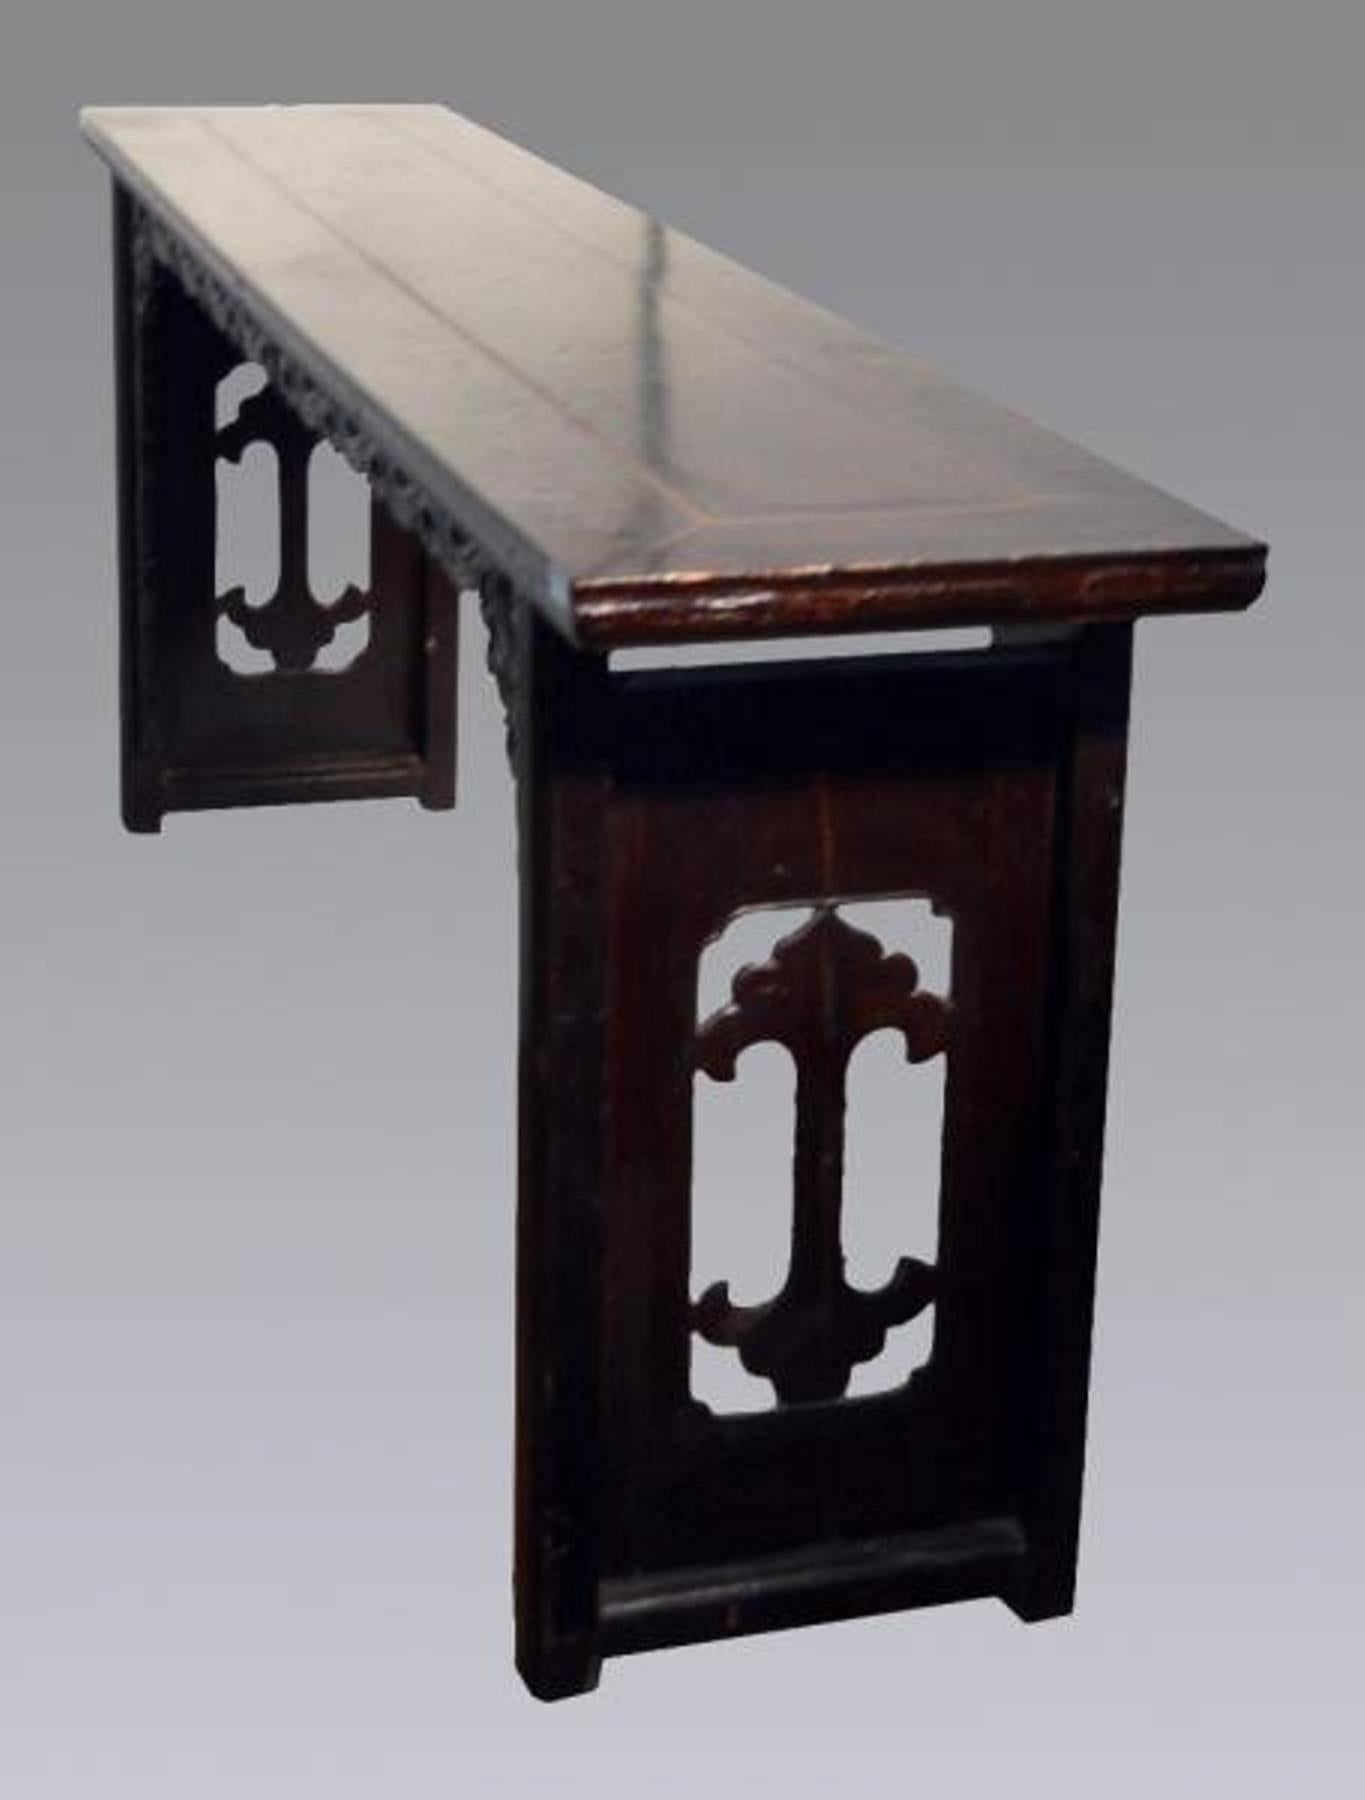 Lacquered Antique Dark Lacquer Console Table with Molding from China in the 1800s